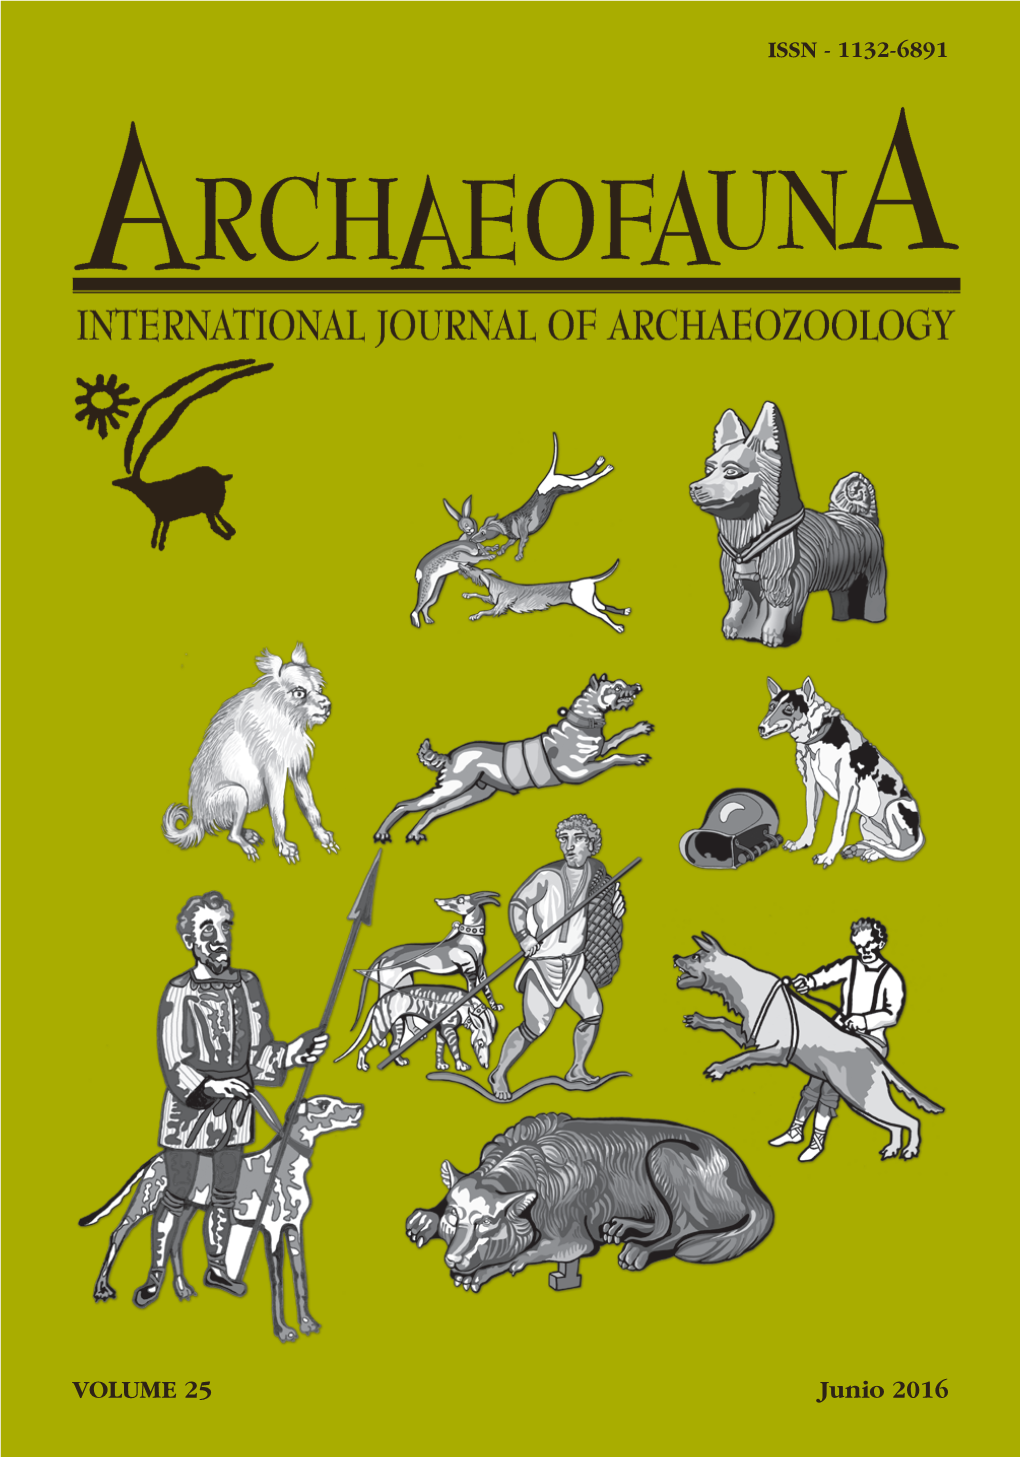 The Dogs of Roman Vindolanda, Part II: Time-Stratigraphic Occurrence, Ethnographic Com- Parisons, and Biotype Reconstruction